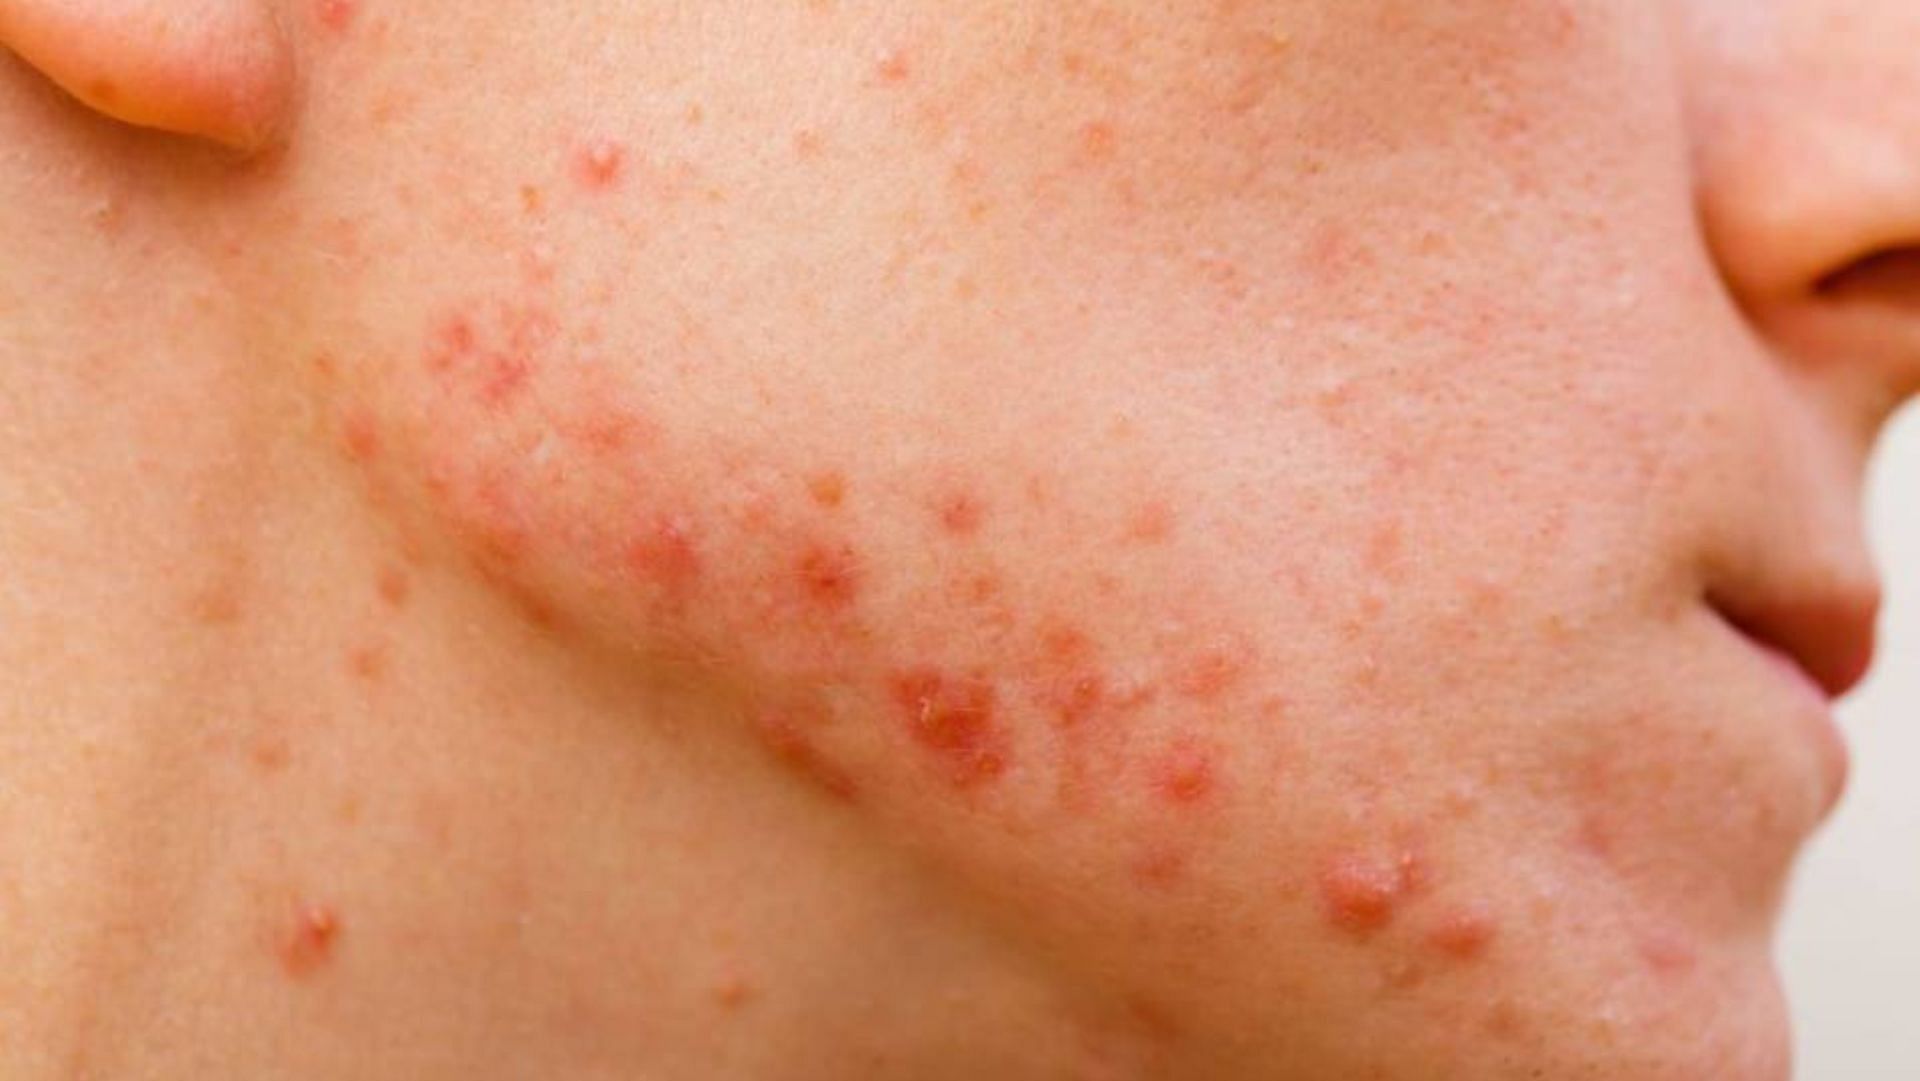 There are some basic lifestyle changes you can make in order to reduce acne problems. (Image via Flickr)